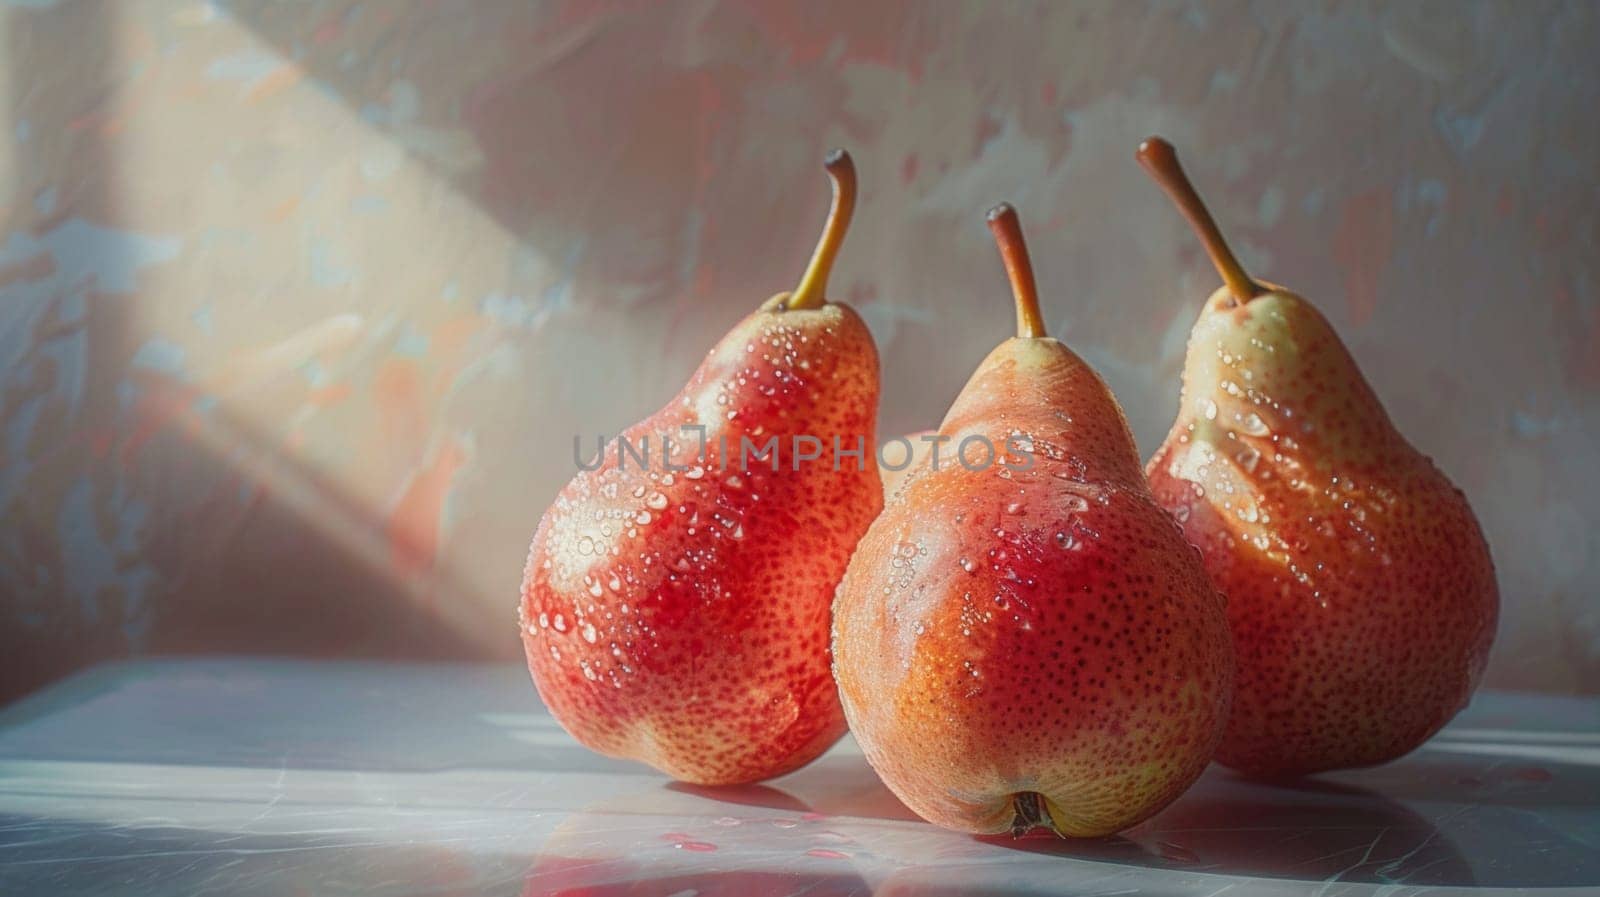 Three pears are sitting on a table with water droplets